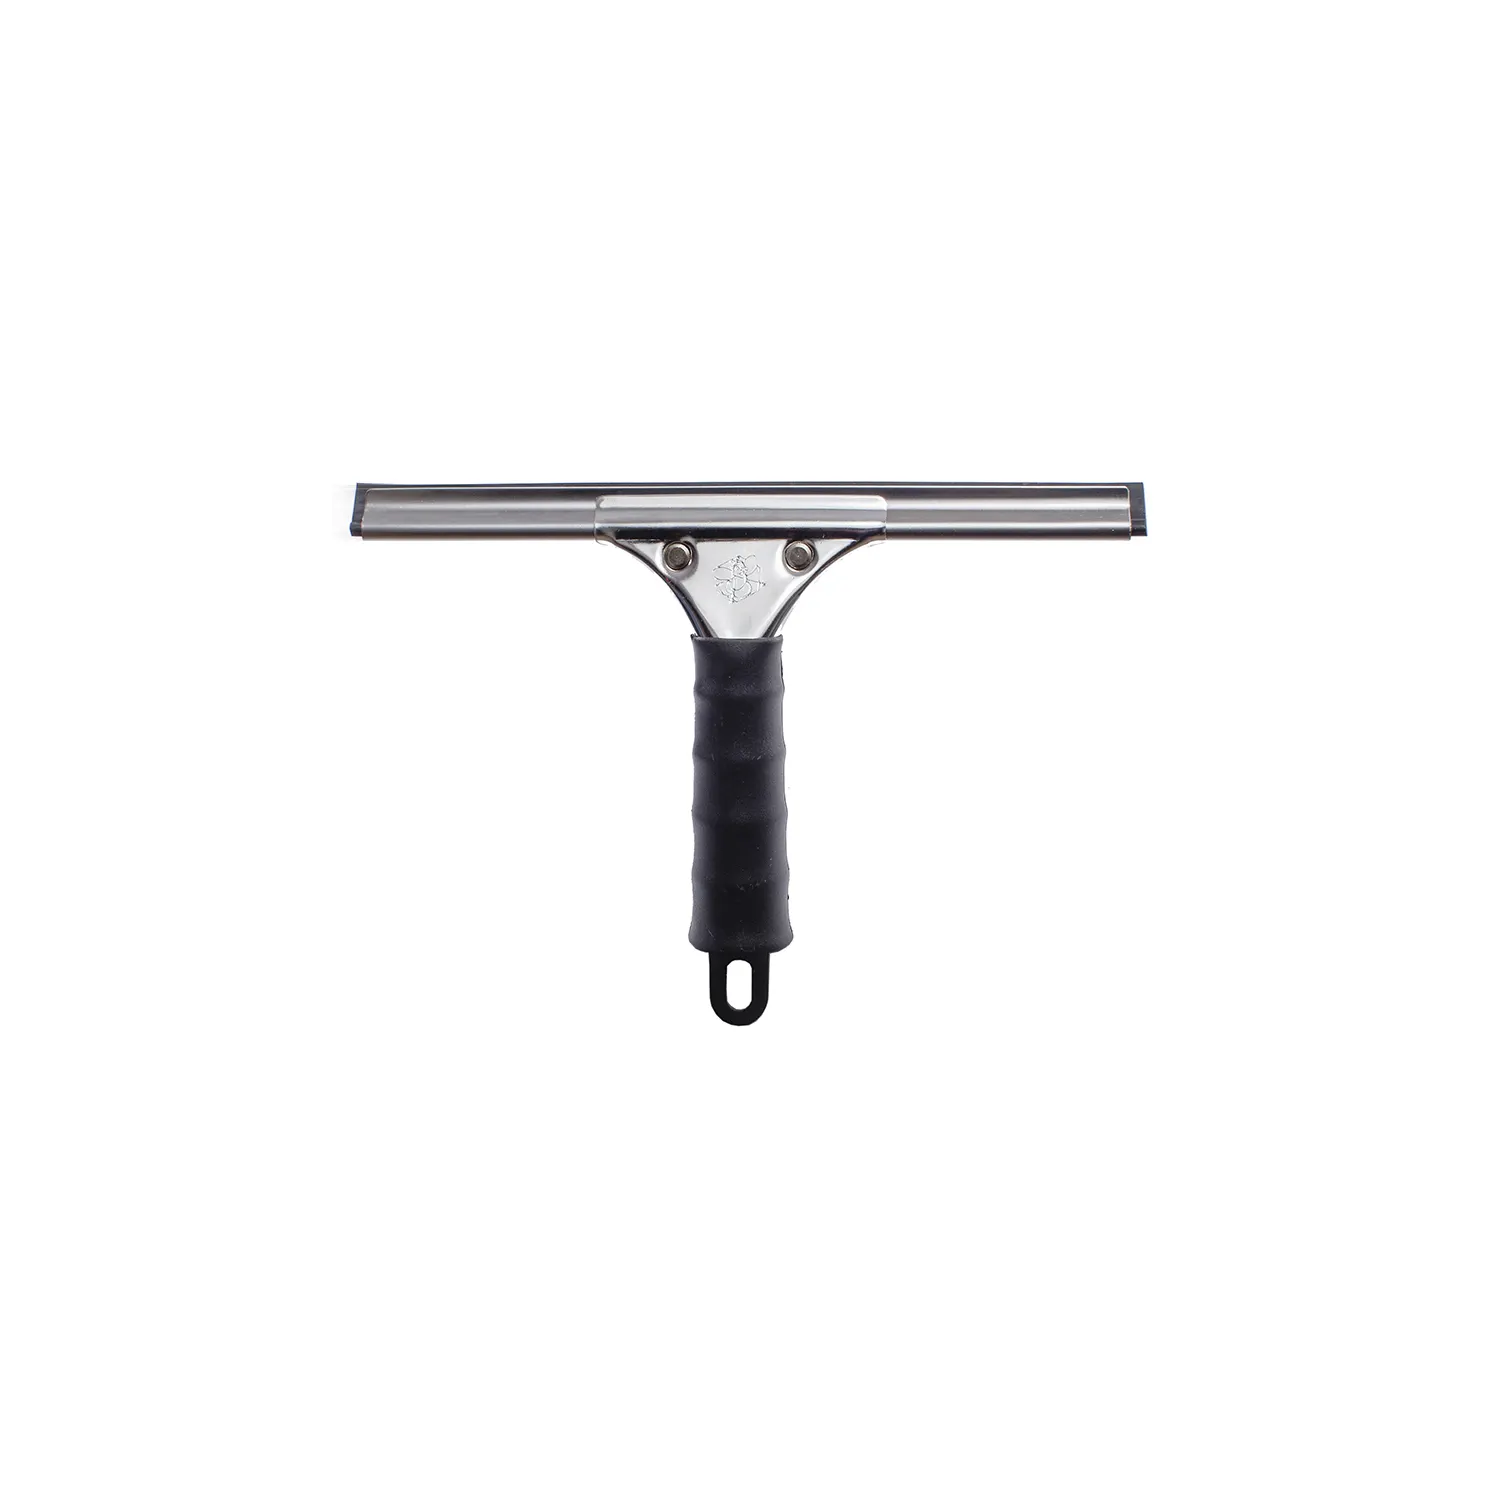 Stainless Steel and Replaceable Rubber Professional Window Squeegee 25 cm | Made in Italy